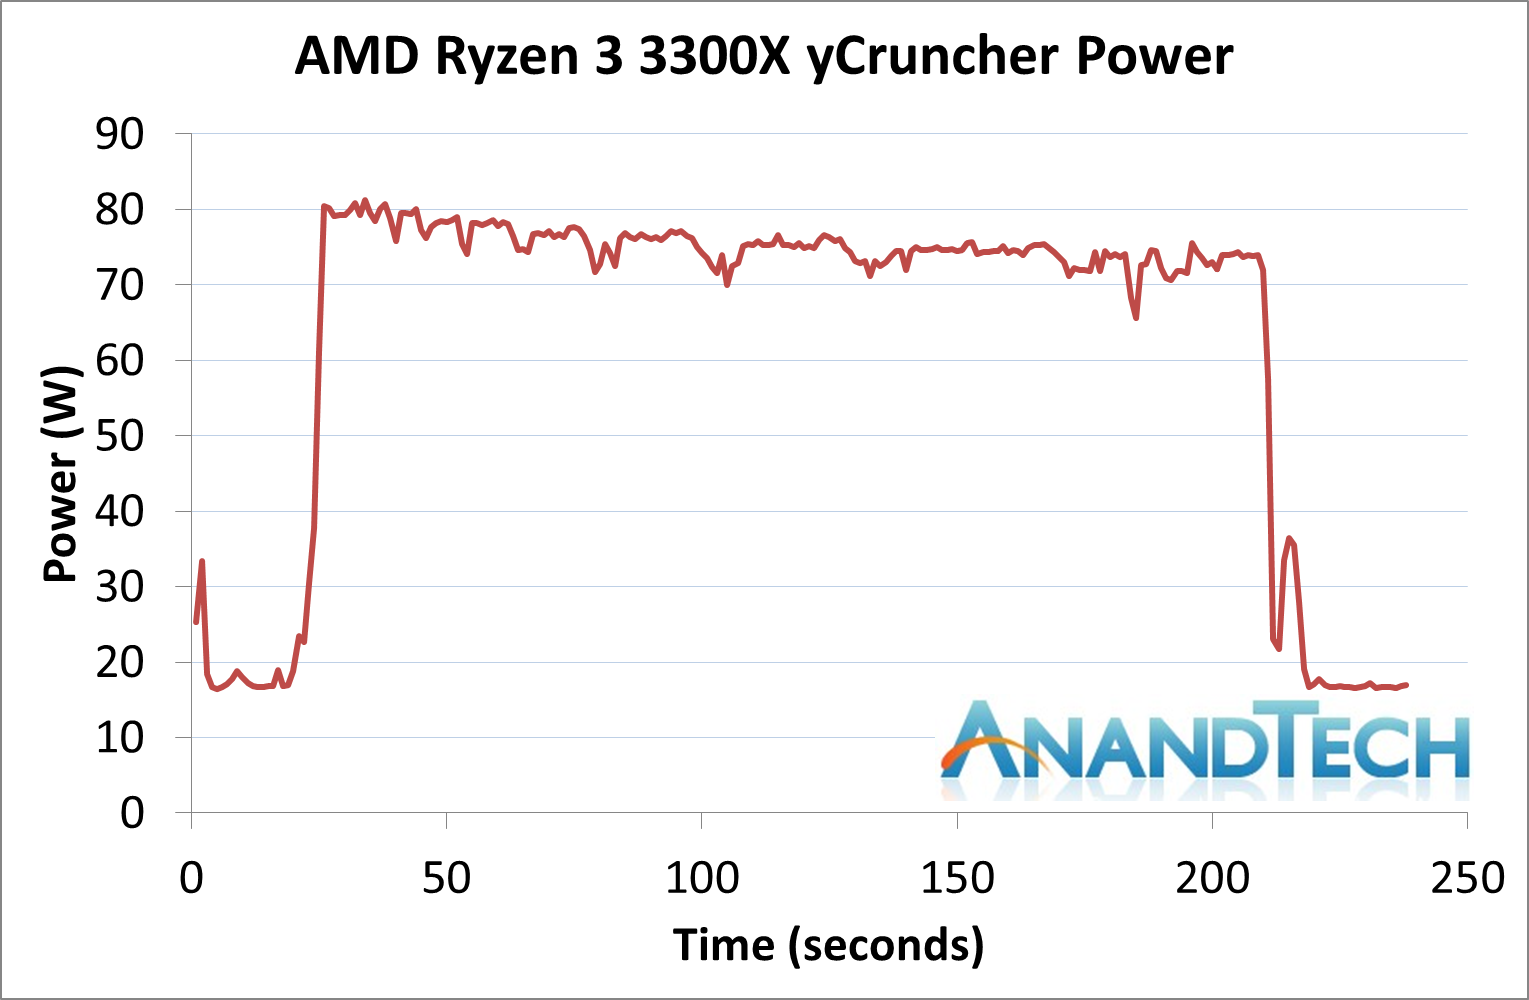 Power Consumption and Frequency Ramps - The AMD Ryzen 3 3300X and